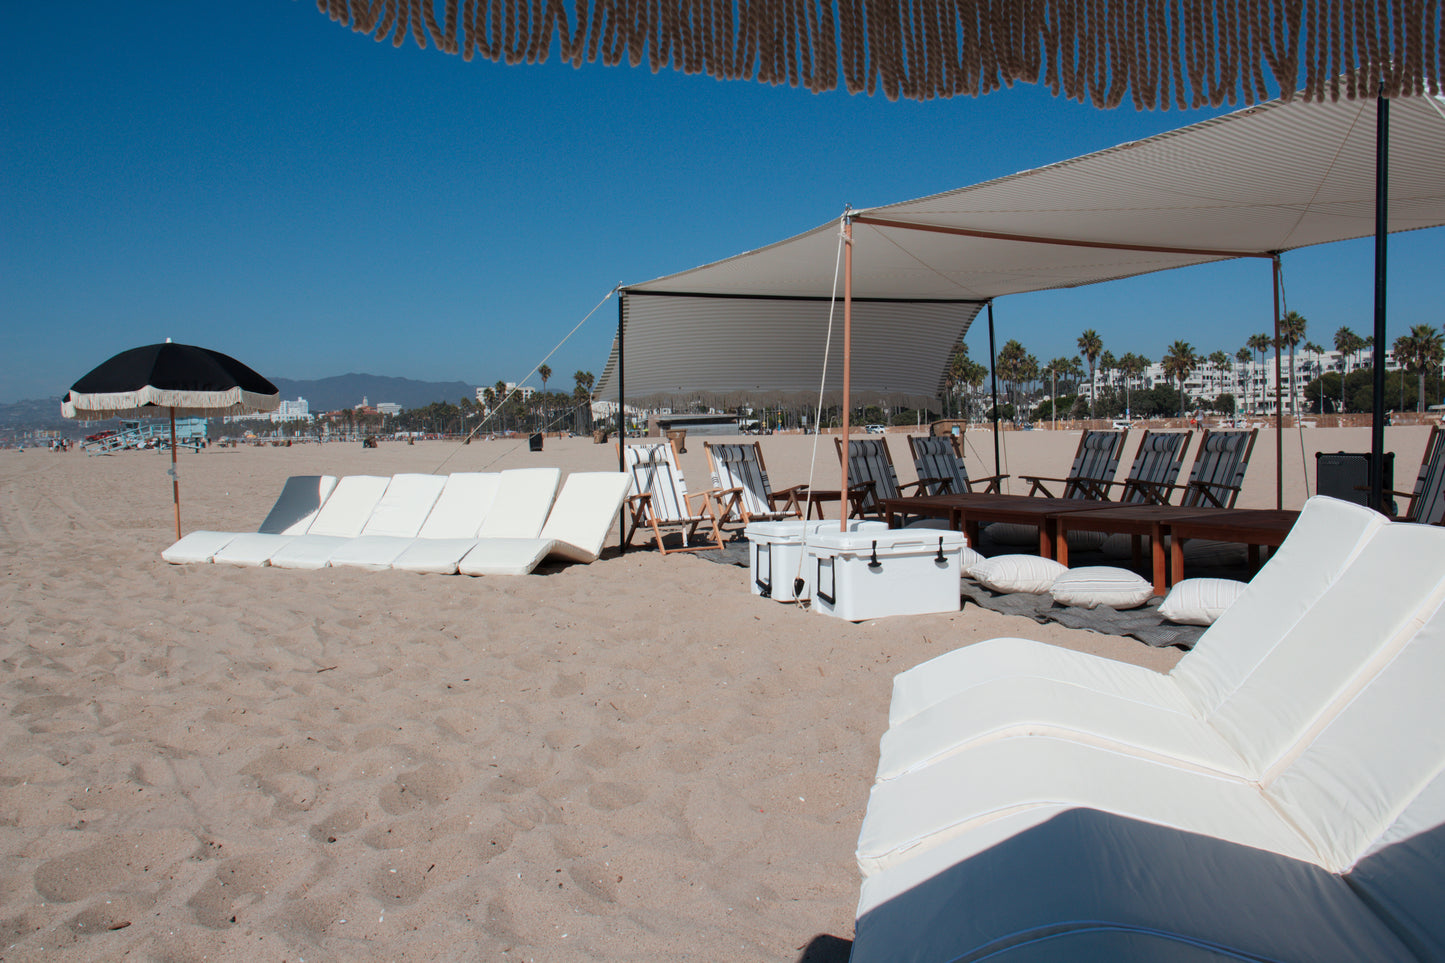 Beach lounge event rental for corporate beach event in Los Angeles